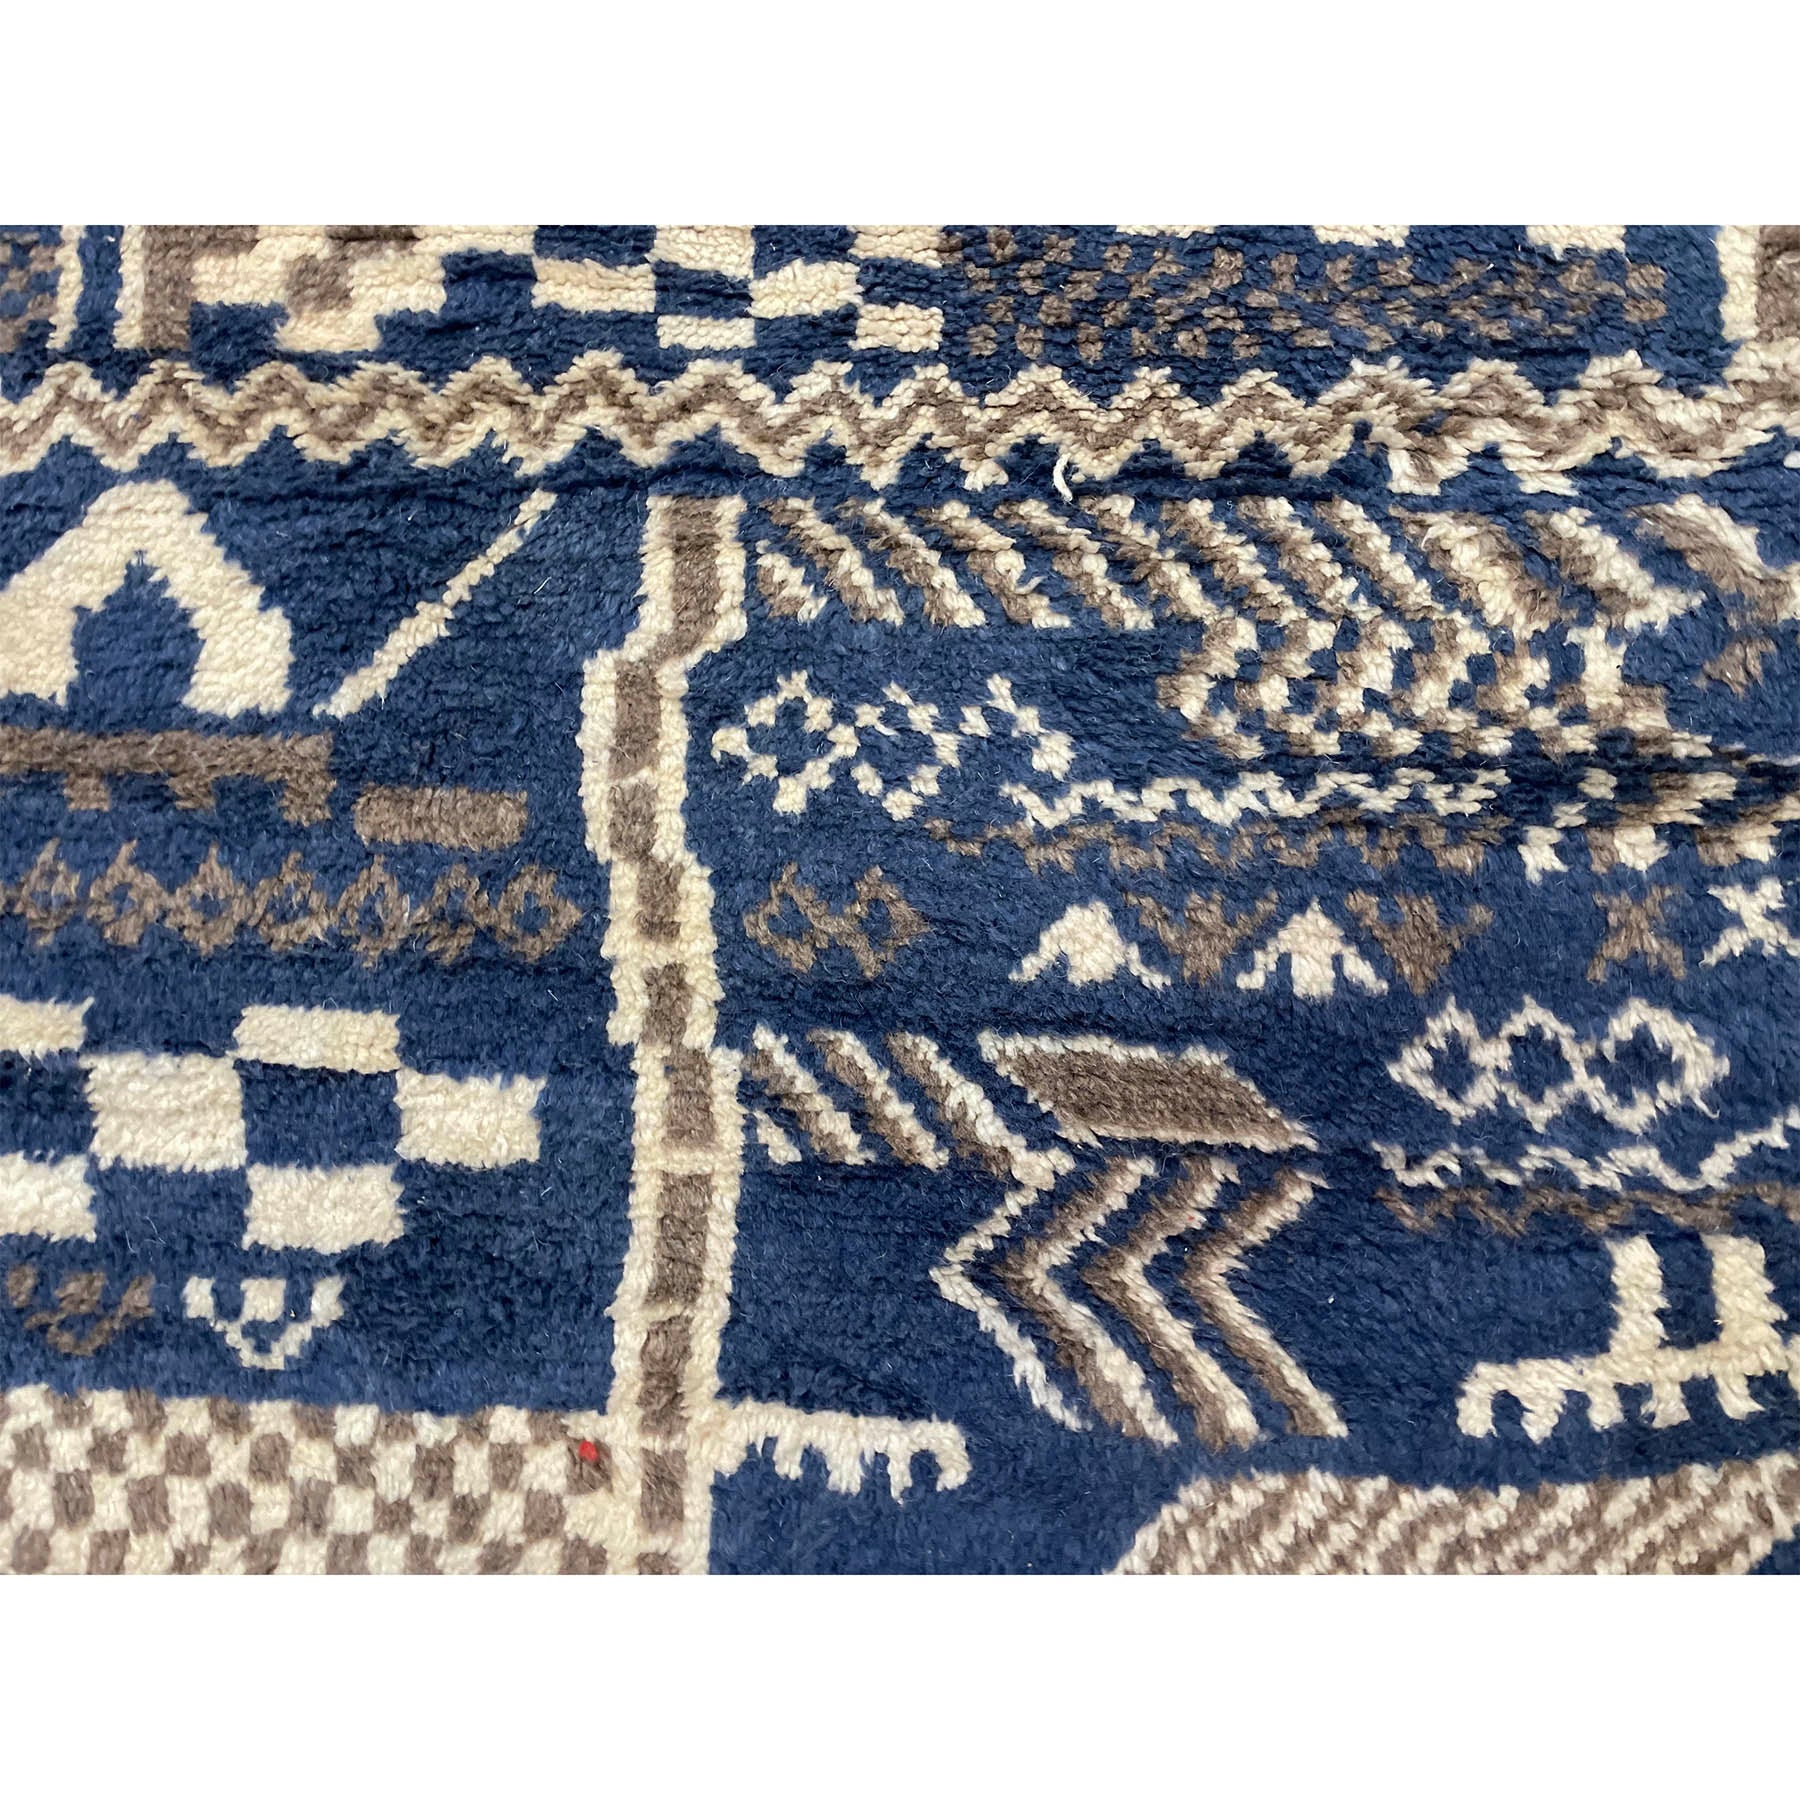 One-of-a-kind blue, grey, and white Moroccan rug - Kantara | Moroccan Rugs